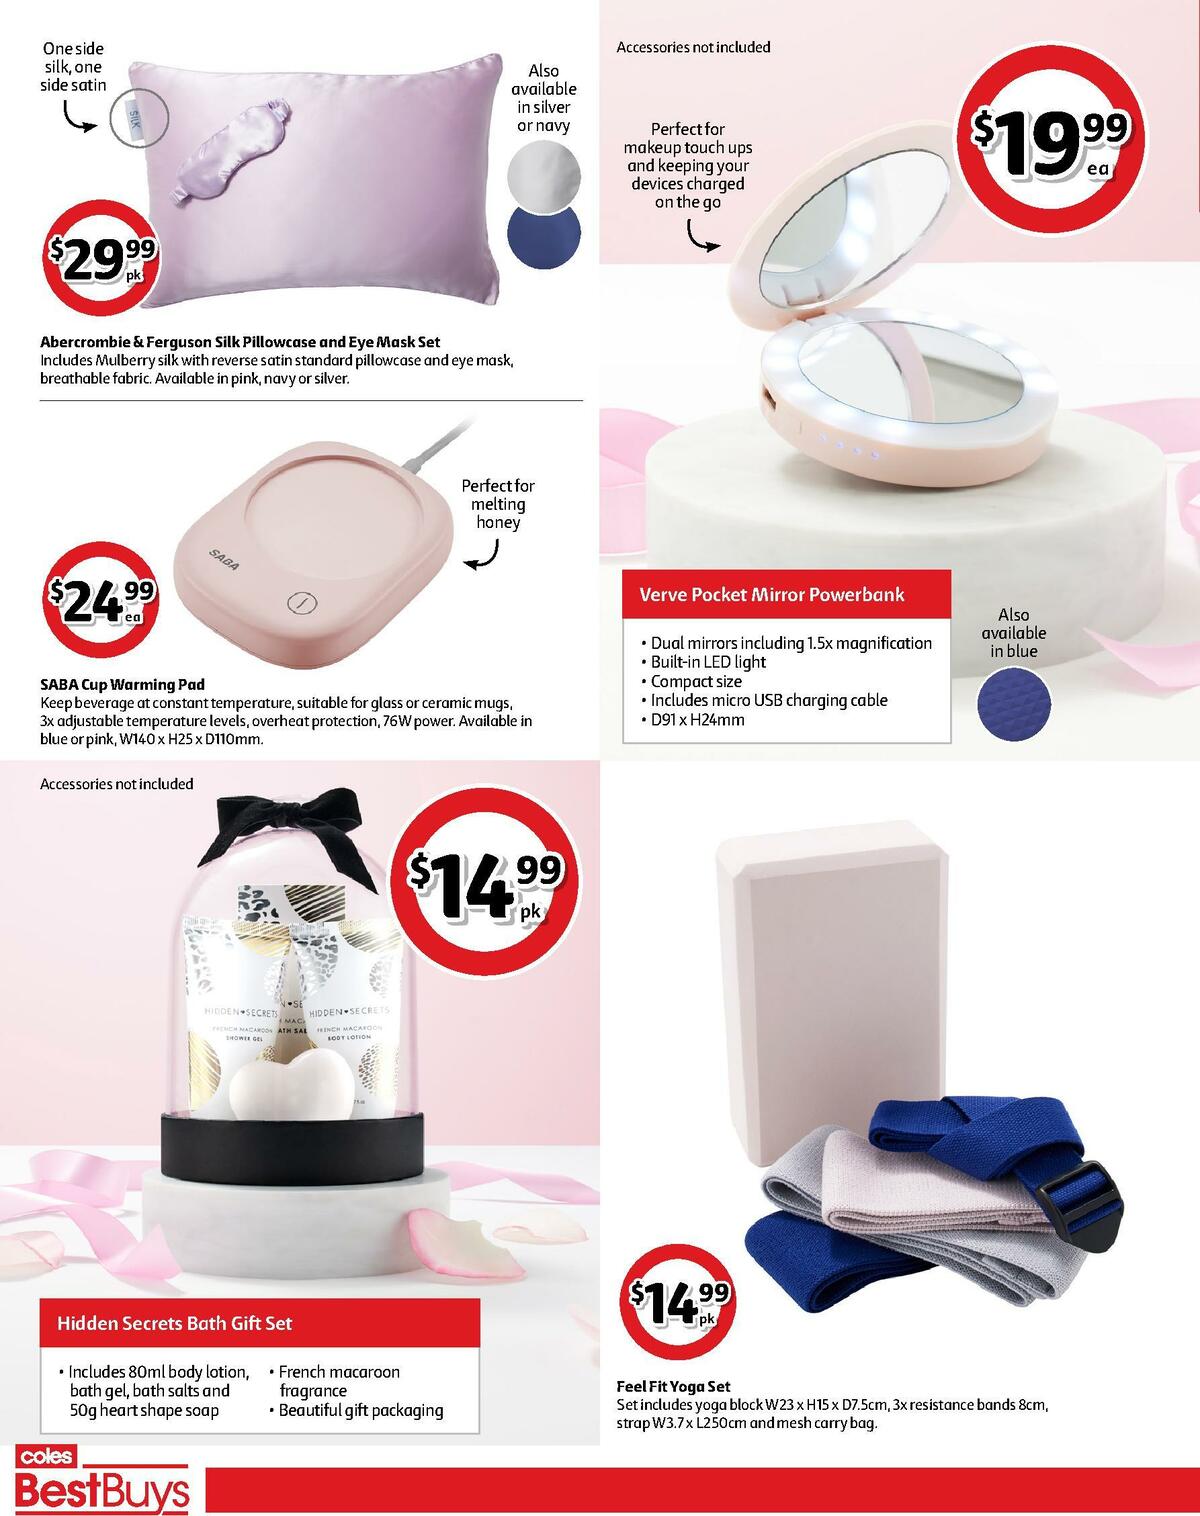 Coles Best Buys - Mother's Day Catalogues from 22 April